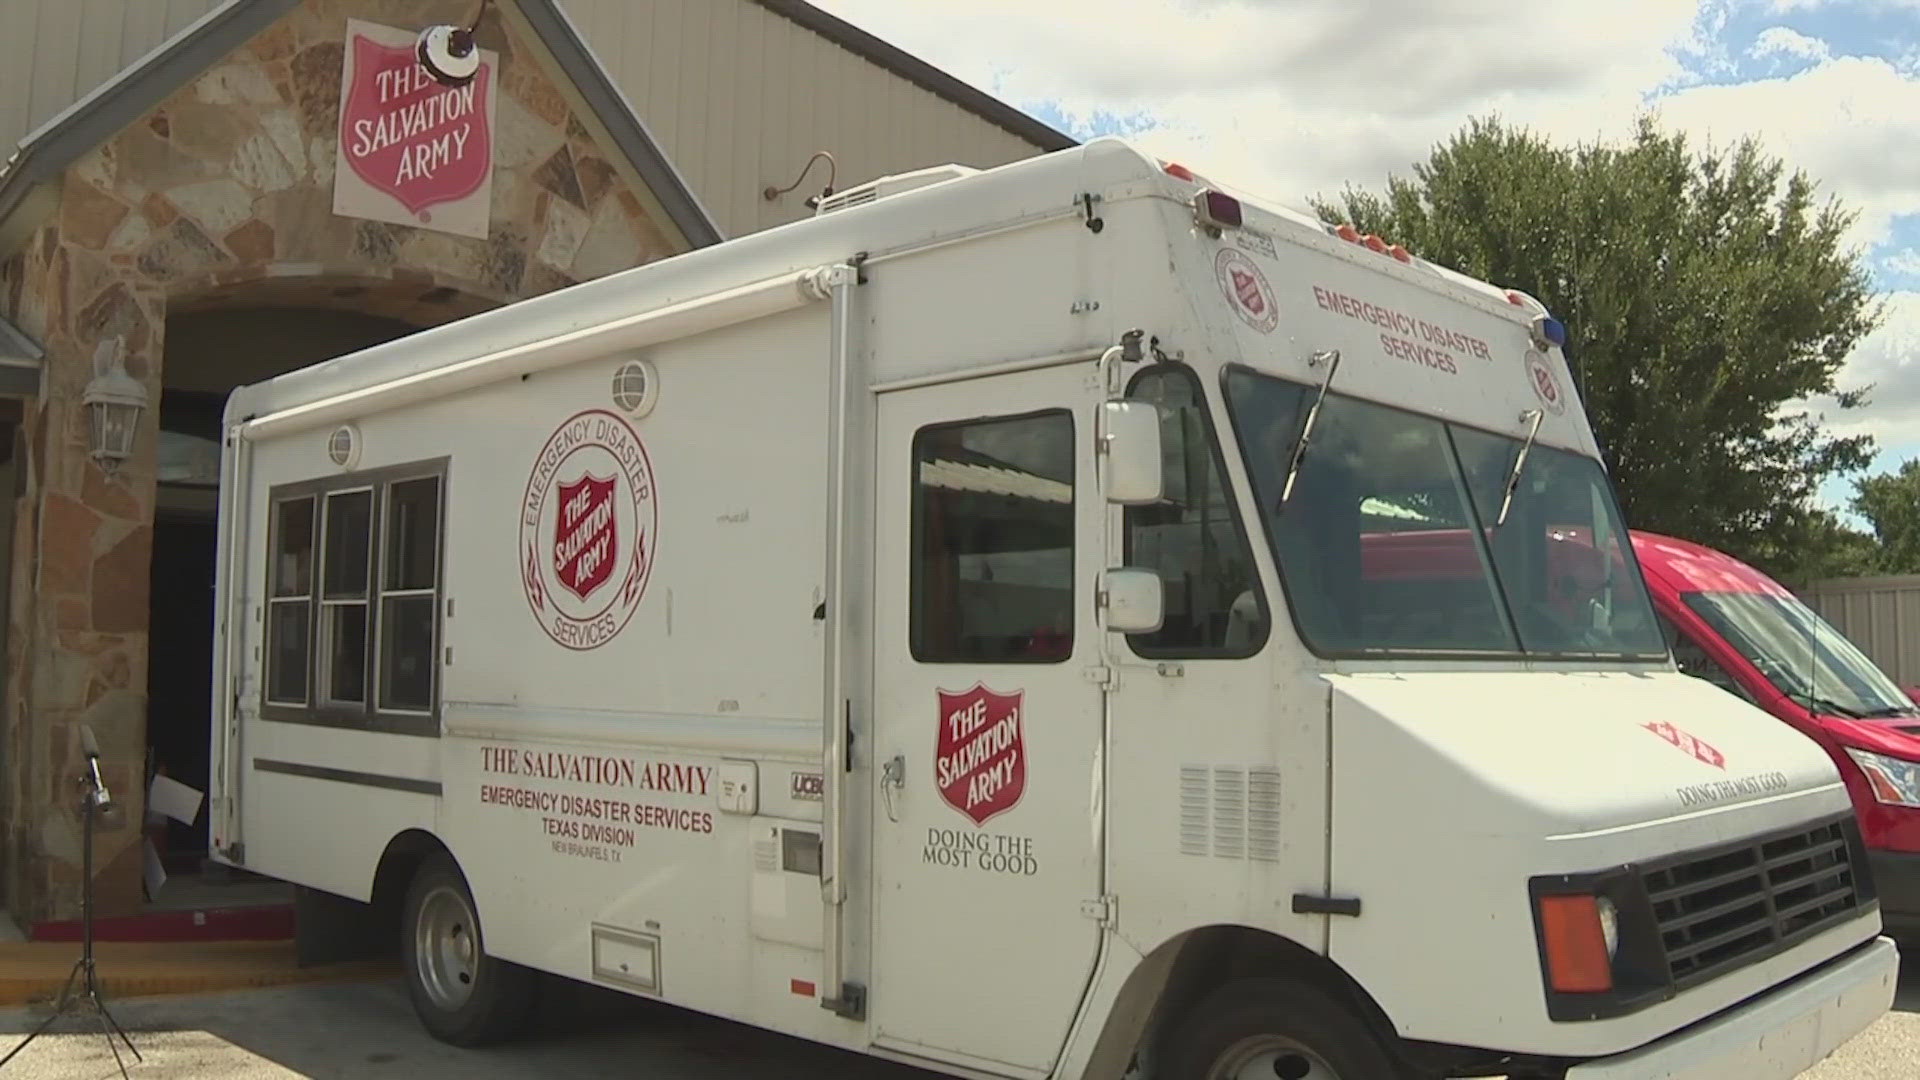 The Salvation Army San Antonio said it is likely it will serve as a command center for the organization during the aftermath of the storm.